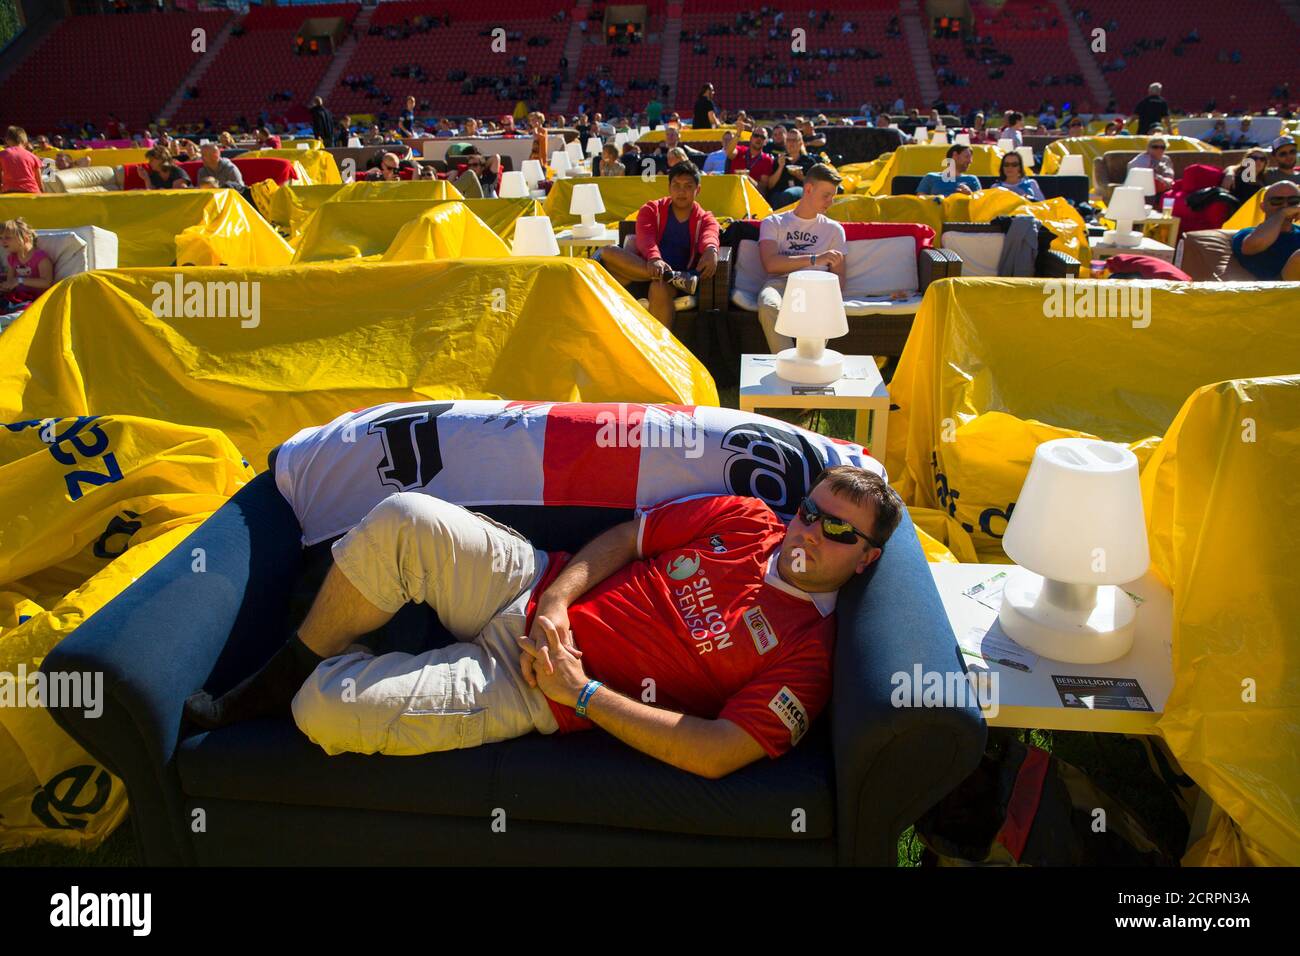 People sit on sofas as they watch a 2014 World Cup soccer match during a  public viewing event at the Alte Foersterei stadium in Berlin, June 15,  2014. Berlin's Union Berlin soccer